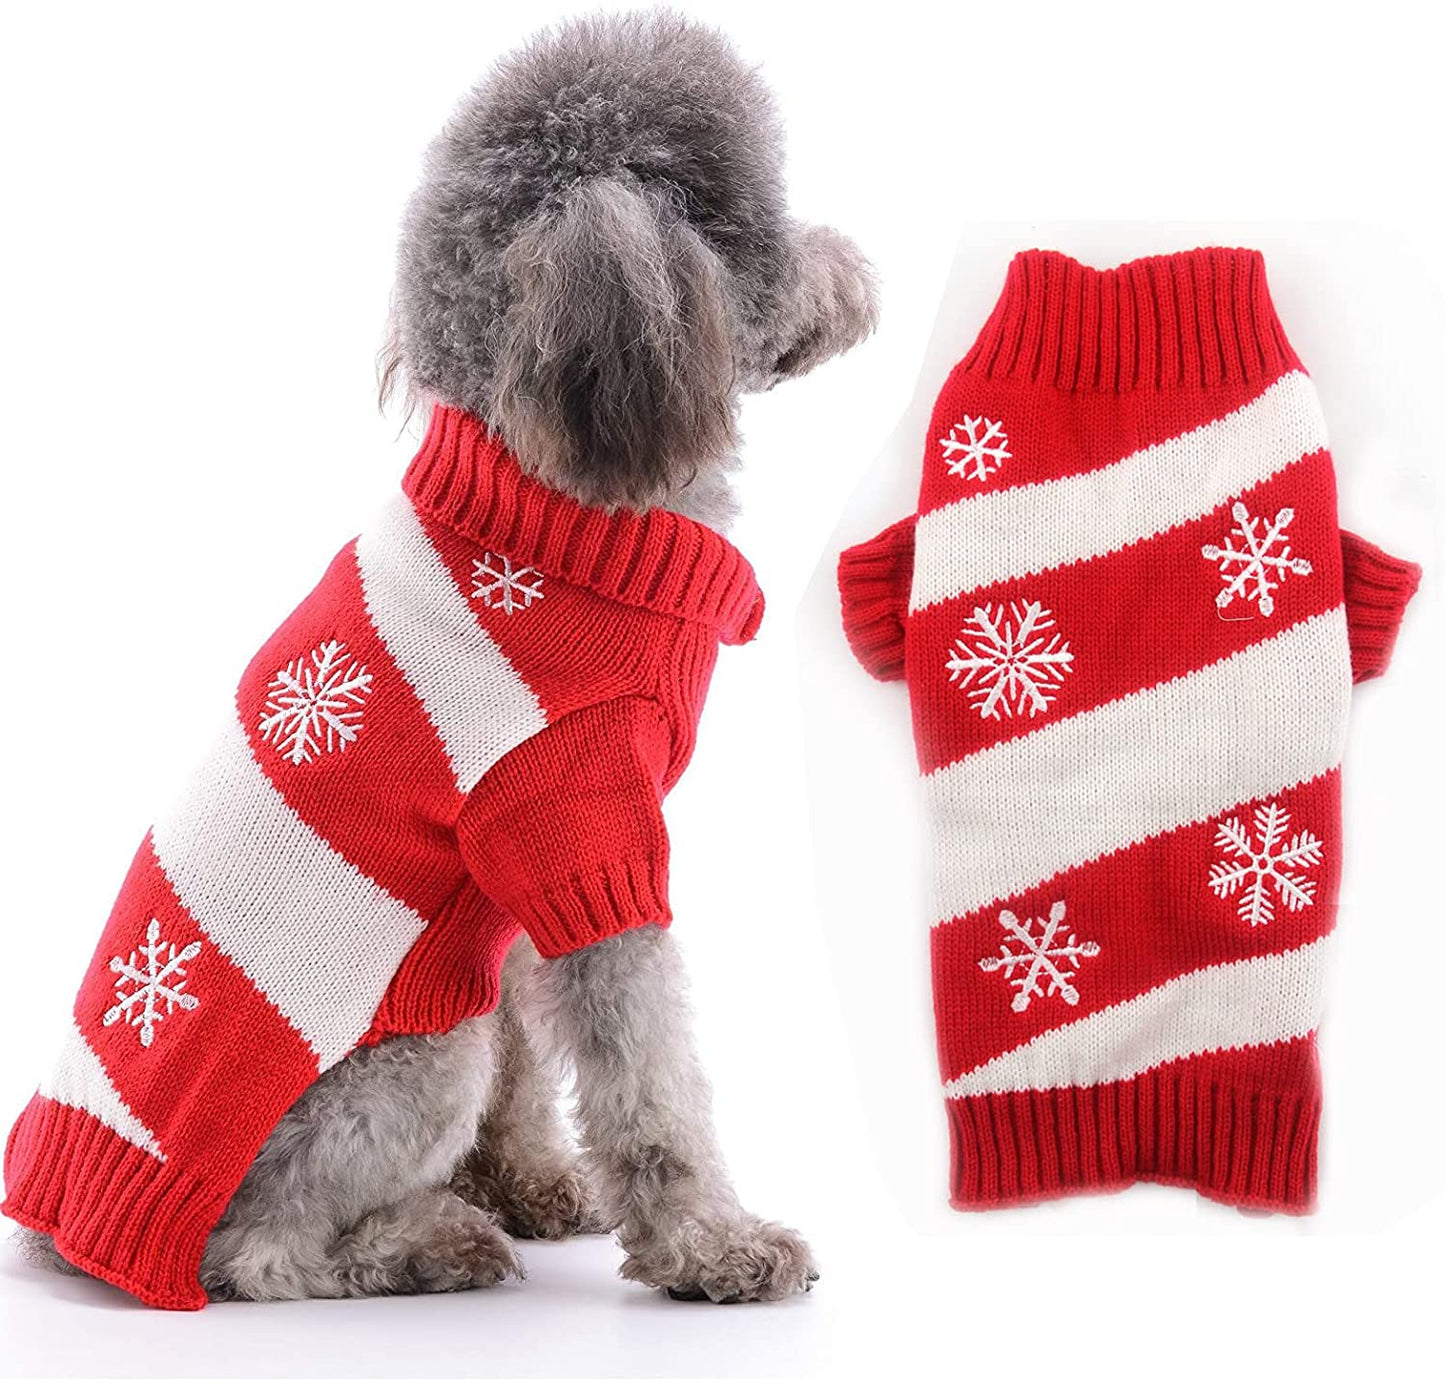 TENGZHI Dog Christmas Sweater Ugly Xmas Puppy Clothes Costume Warm Knitted Cat Outfit Jumper Cute Reindeer Pet Clothing for Small Medium Large Dogs Cats（S,Black） Animals & Pet Supplies > Pet Supplies > Dog Supplies > Dog Apparel Yi Wu Shi Teng Zhi Dian Zi Shang Wu You Xian Gong Si Red White Snowflakes X-Small 